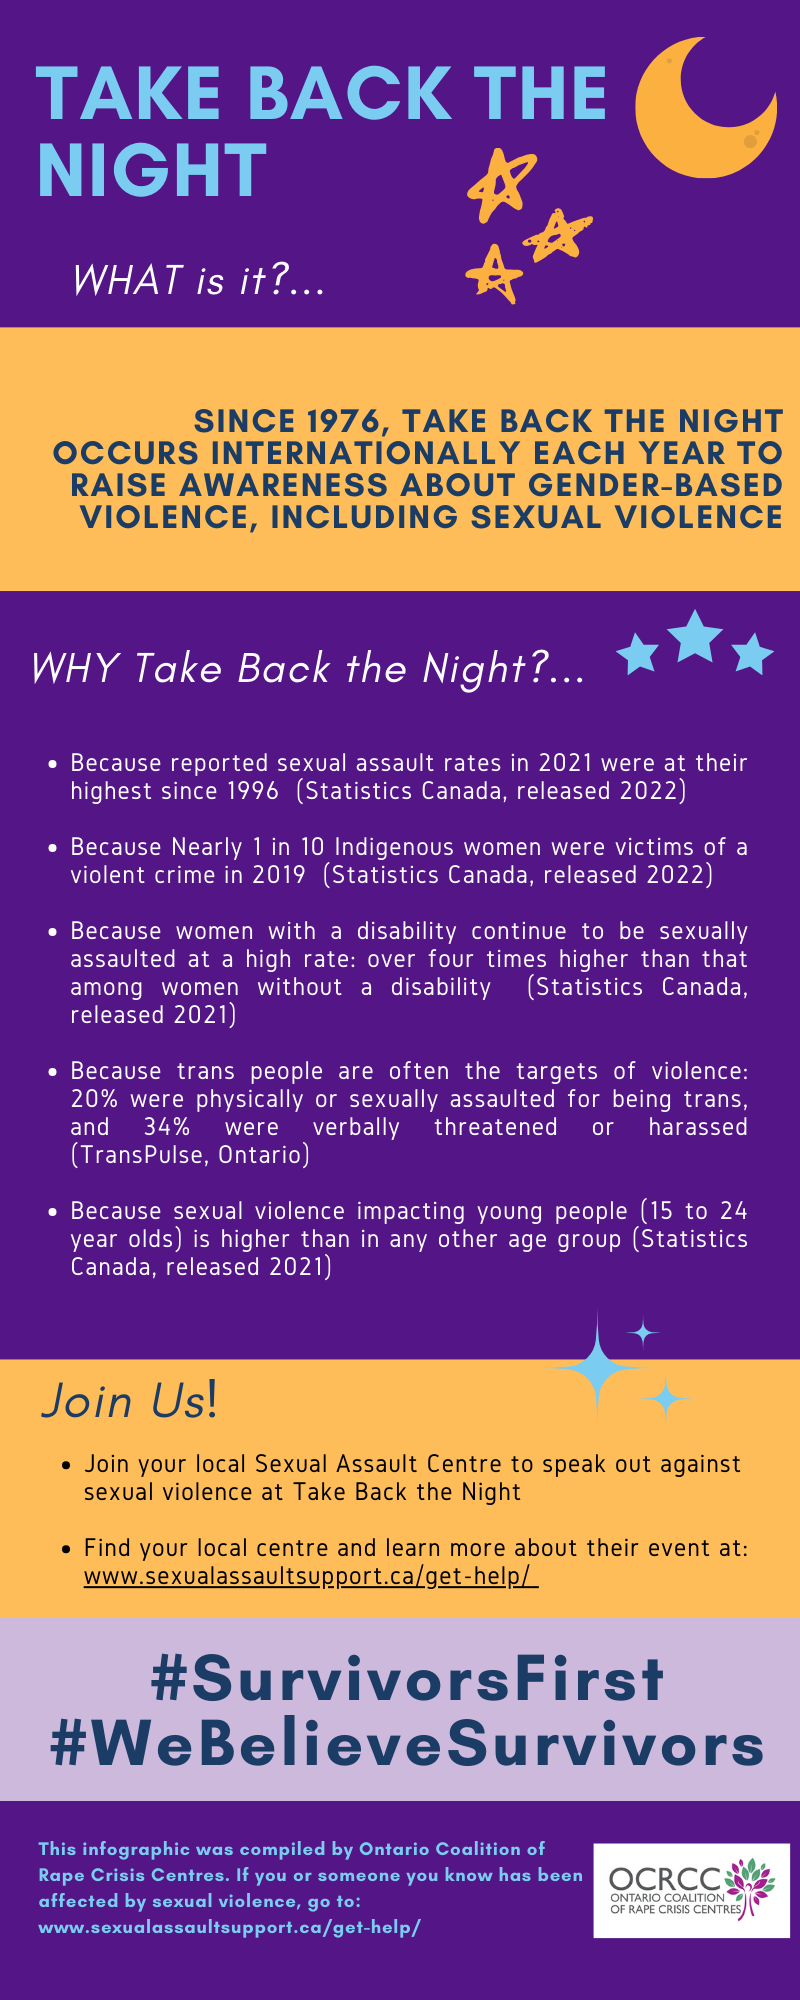 Take Back The Night Shop for Survivors and Supporters – Take Back